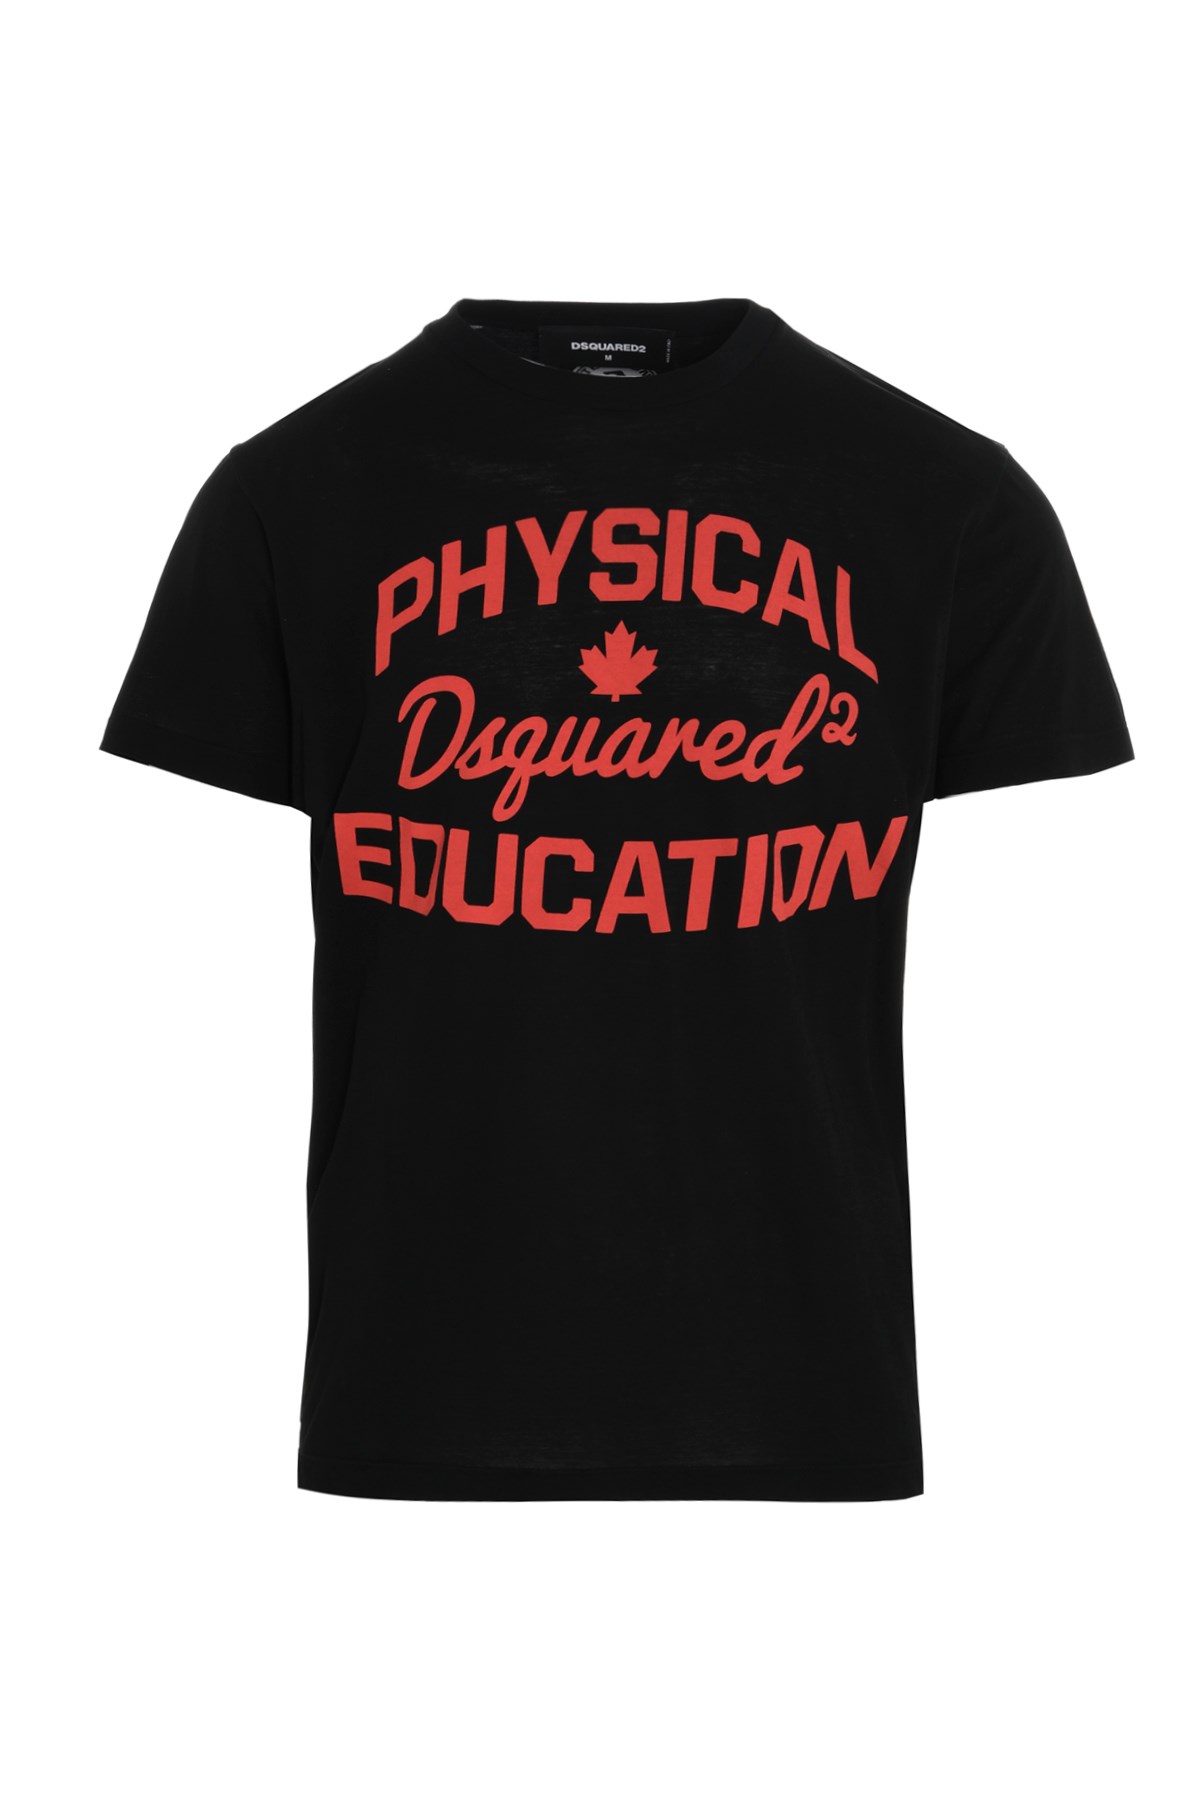 DSQUARED2 T-Shirt 'Physical Education'